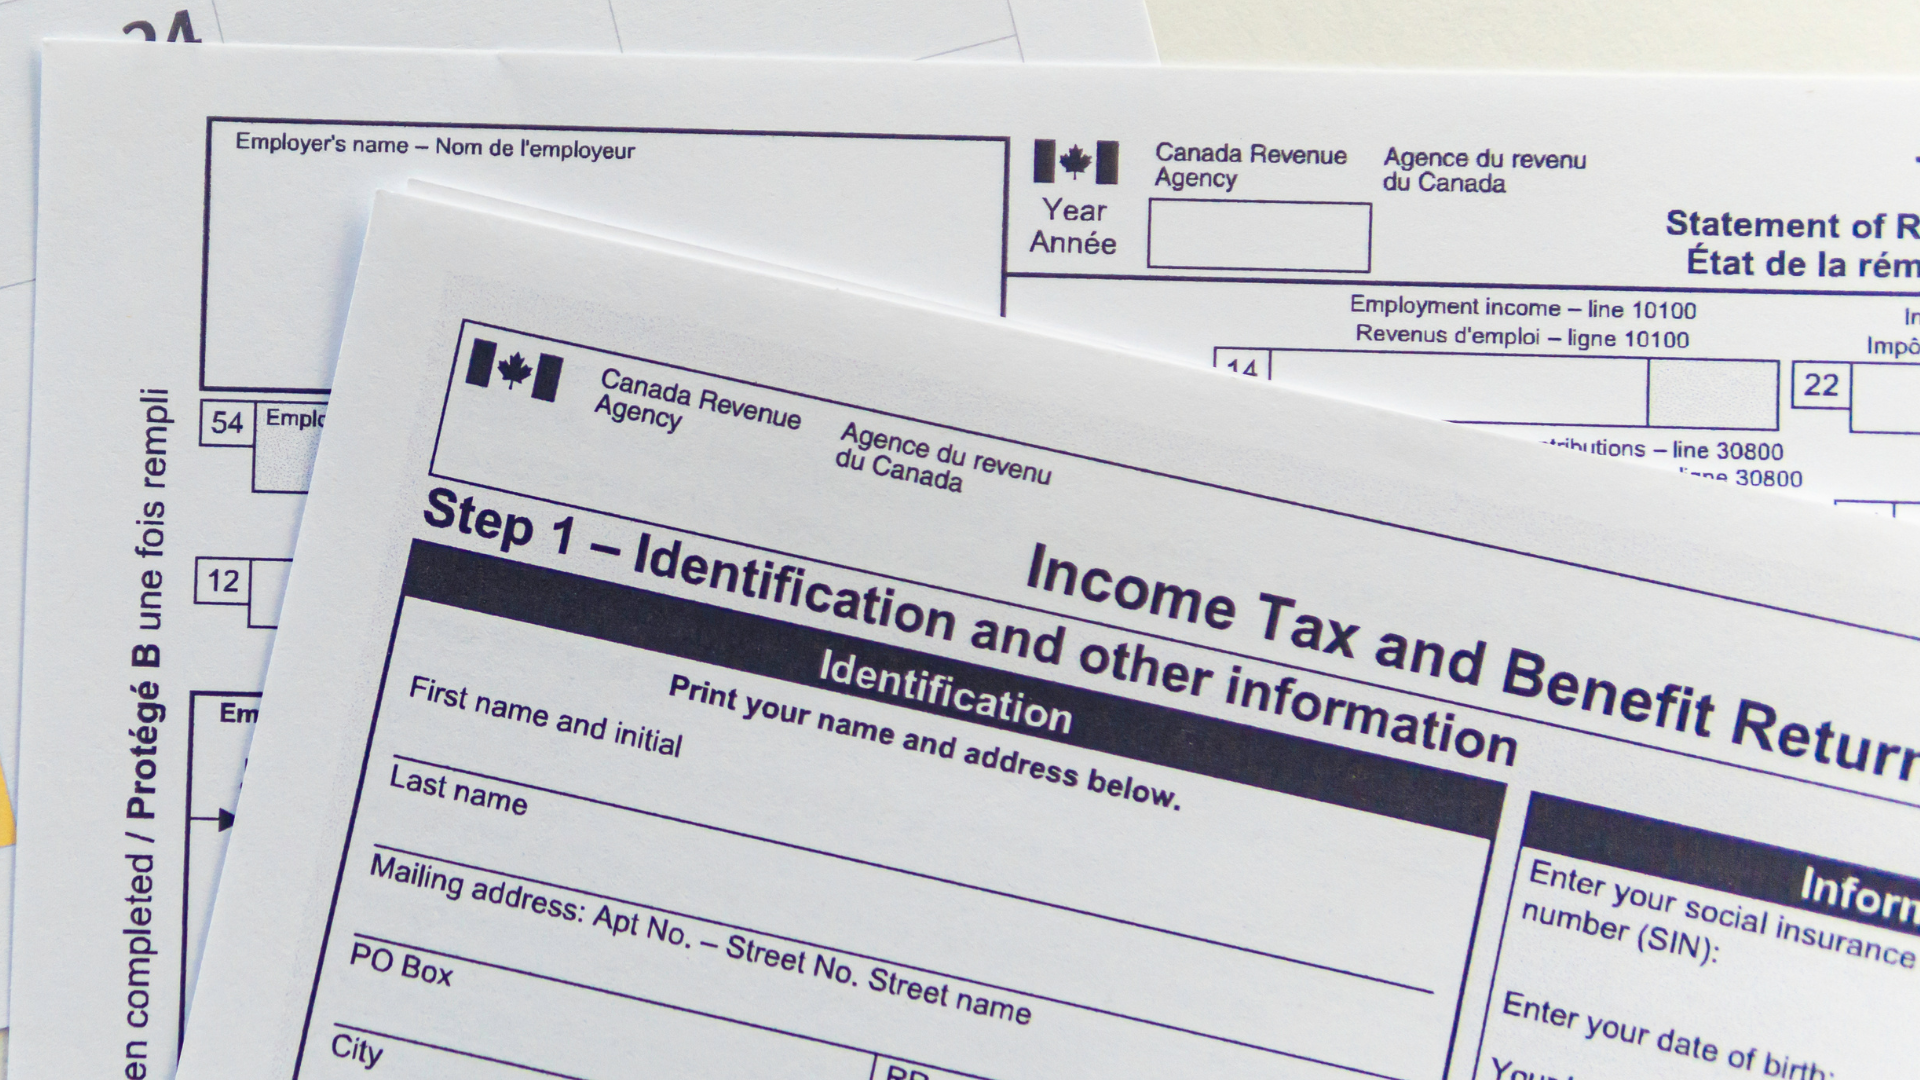 What Would It Cost to Miss the April 30 Tax Filing Deadline?